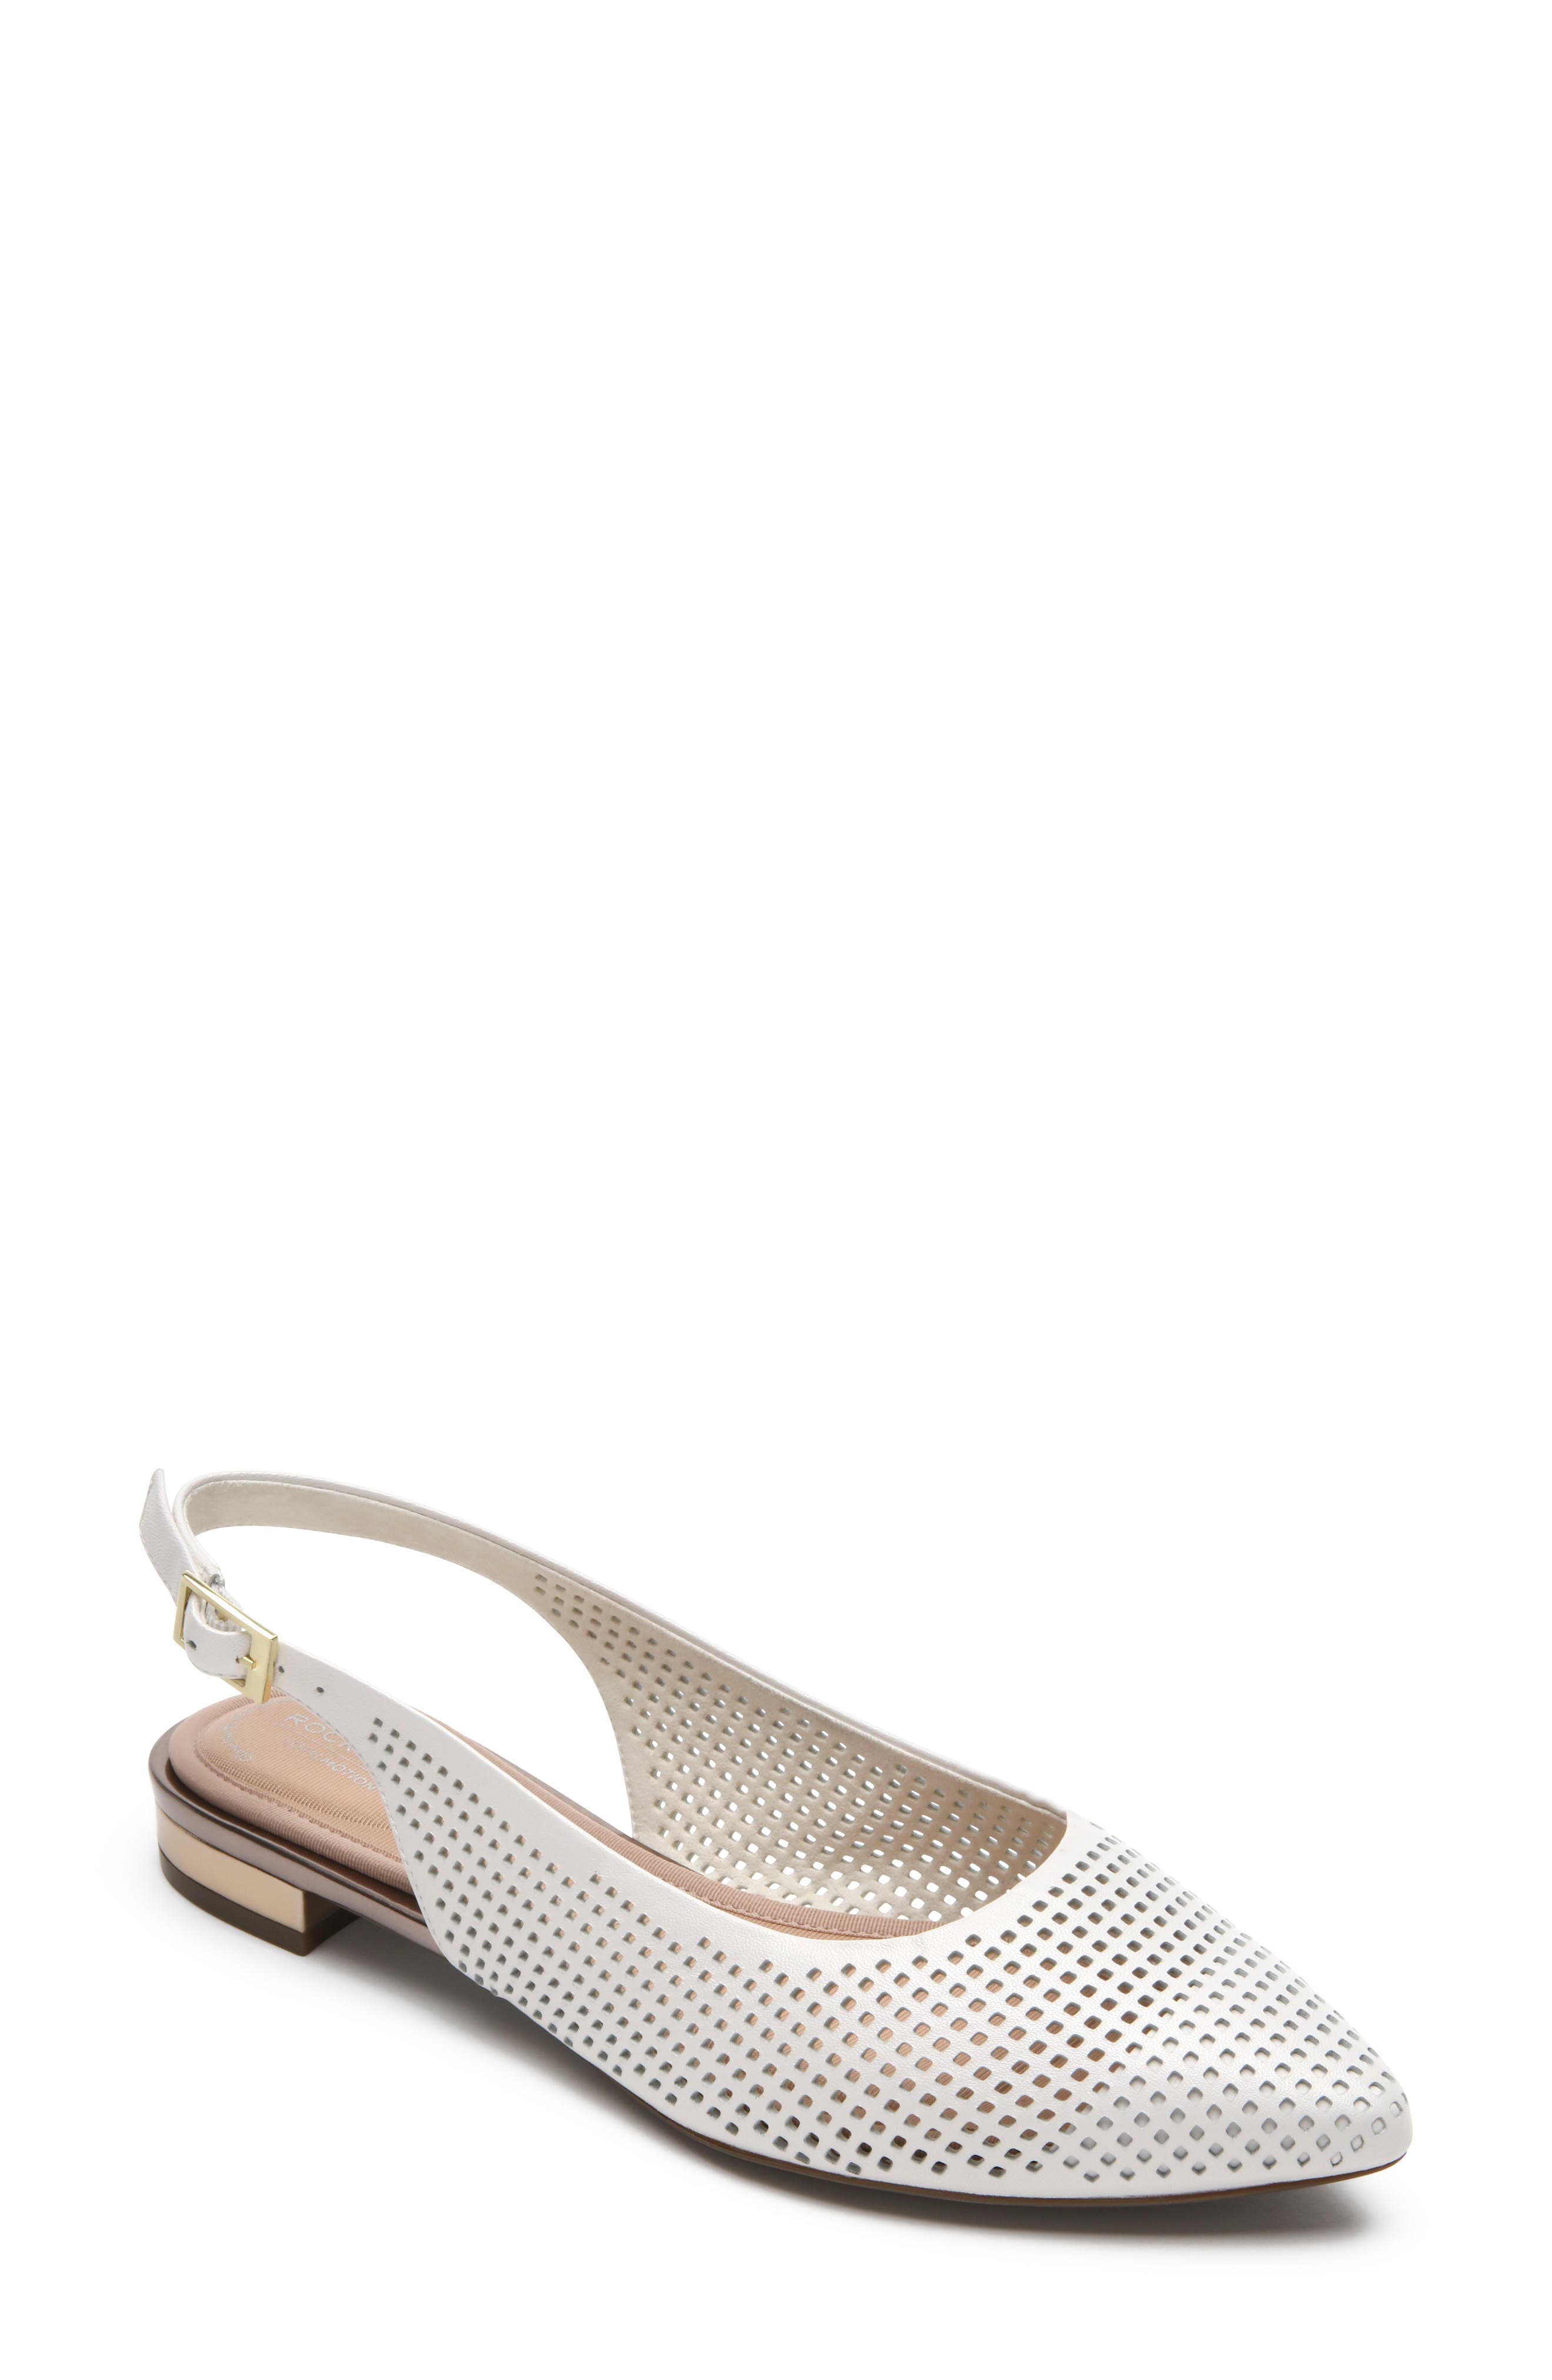 Rockport | Adelyn Perforated Slingback 